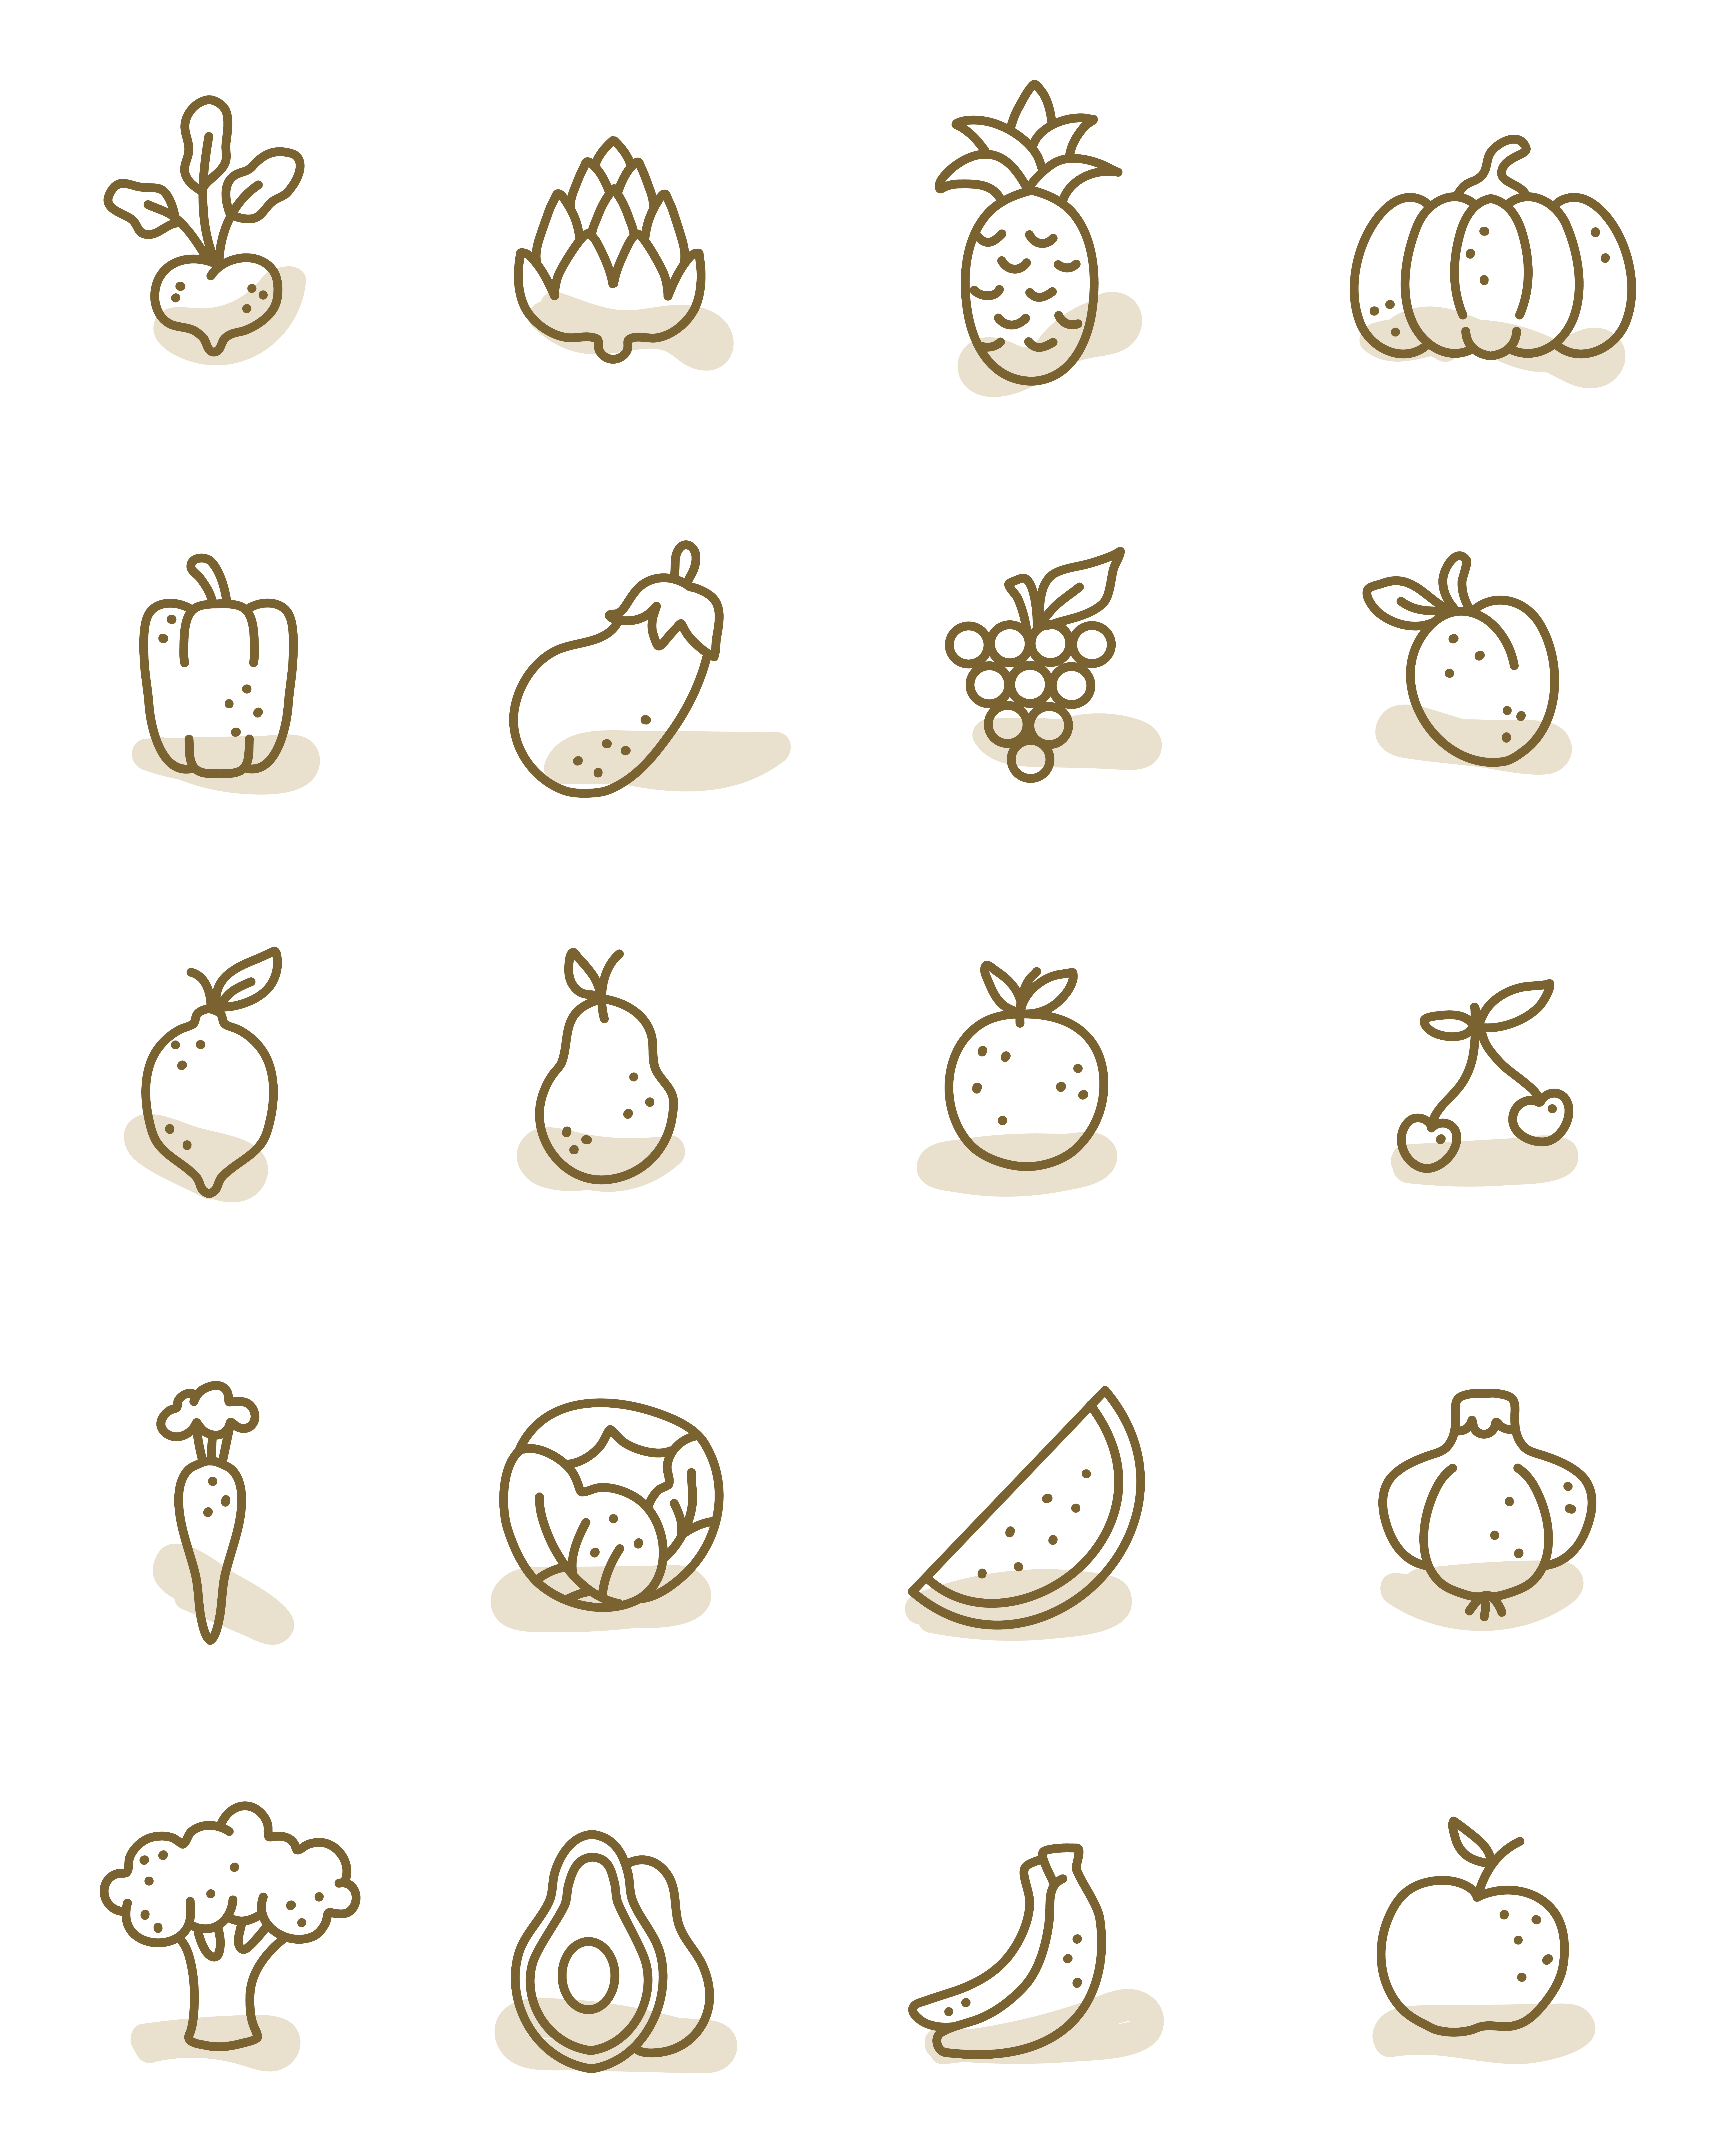 Bunch of different types of fruits and vegetables.